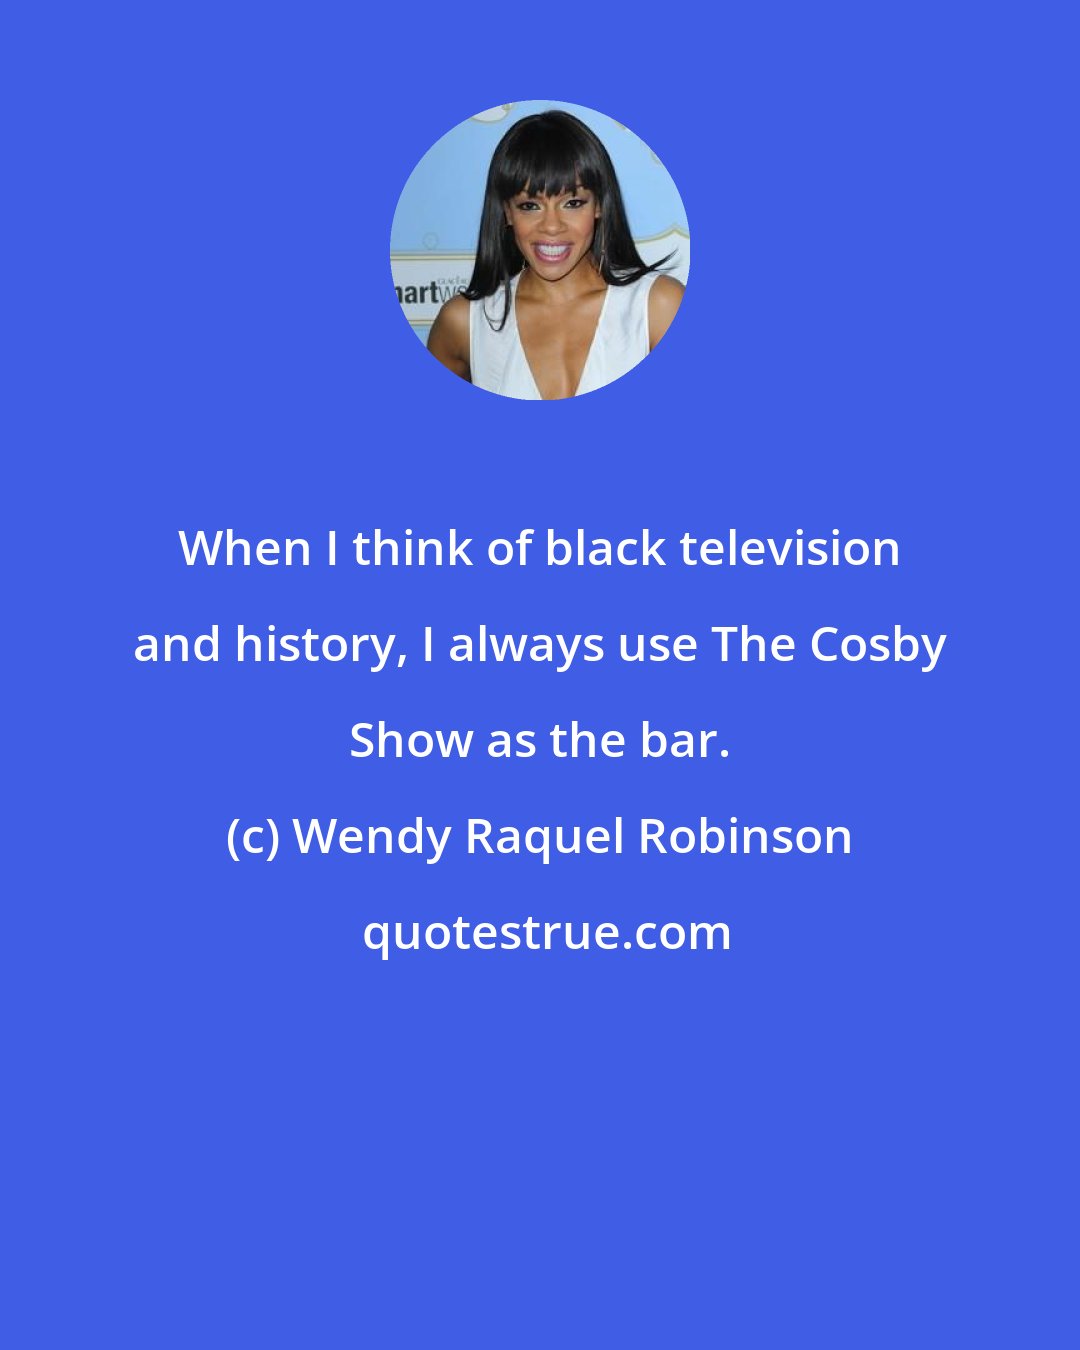 Wendy Raquel Robinson: When I think of black television and history, I always use The Cosby Show as the bar.